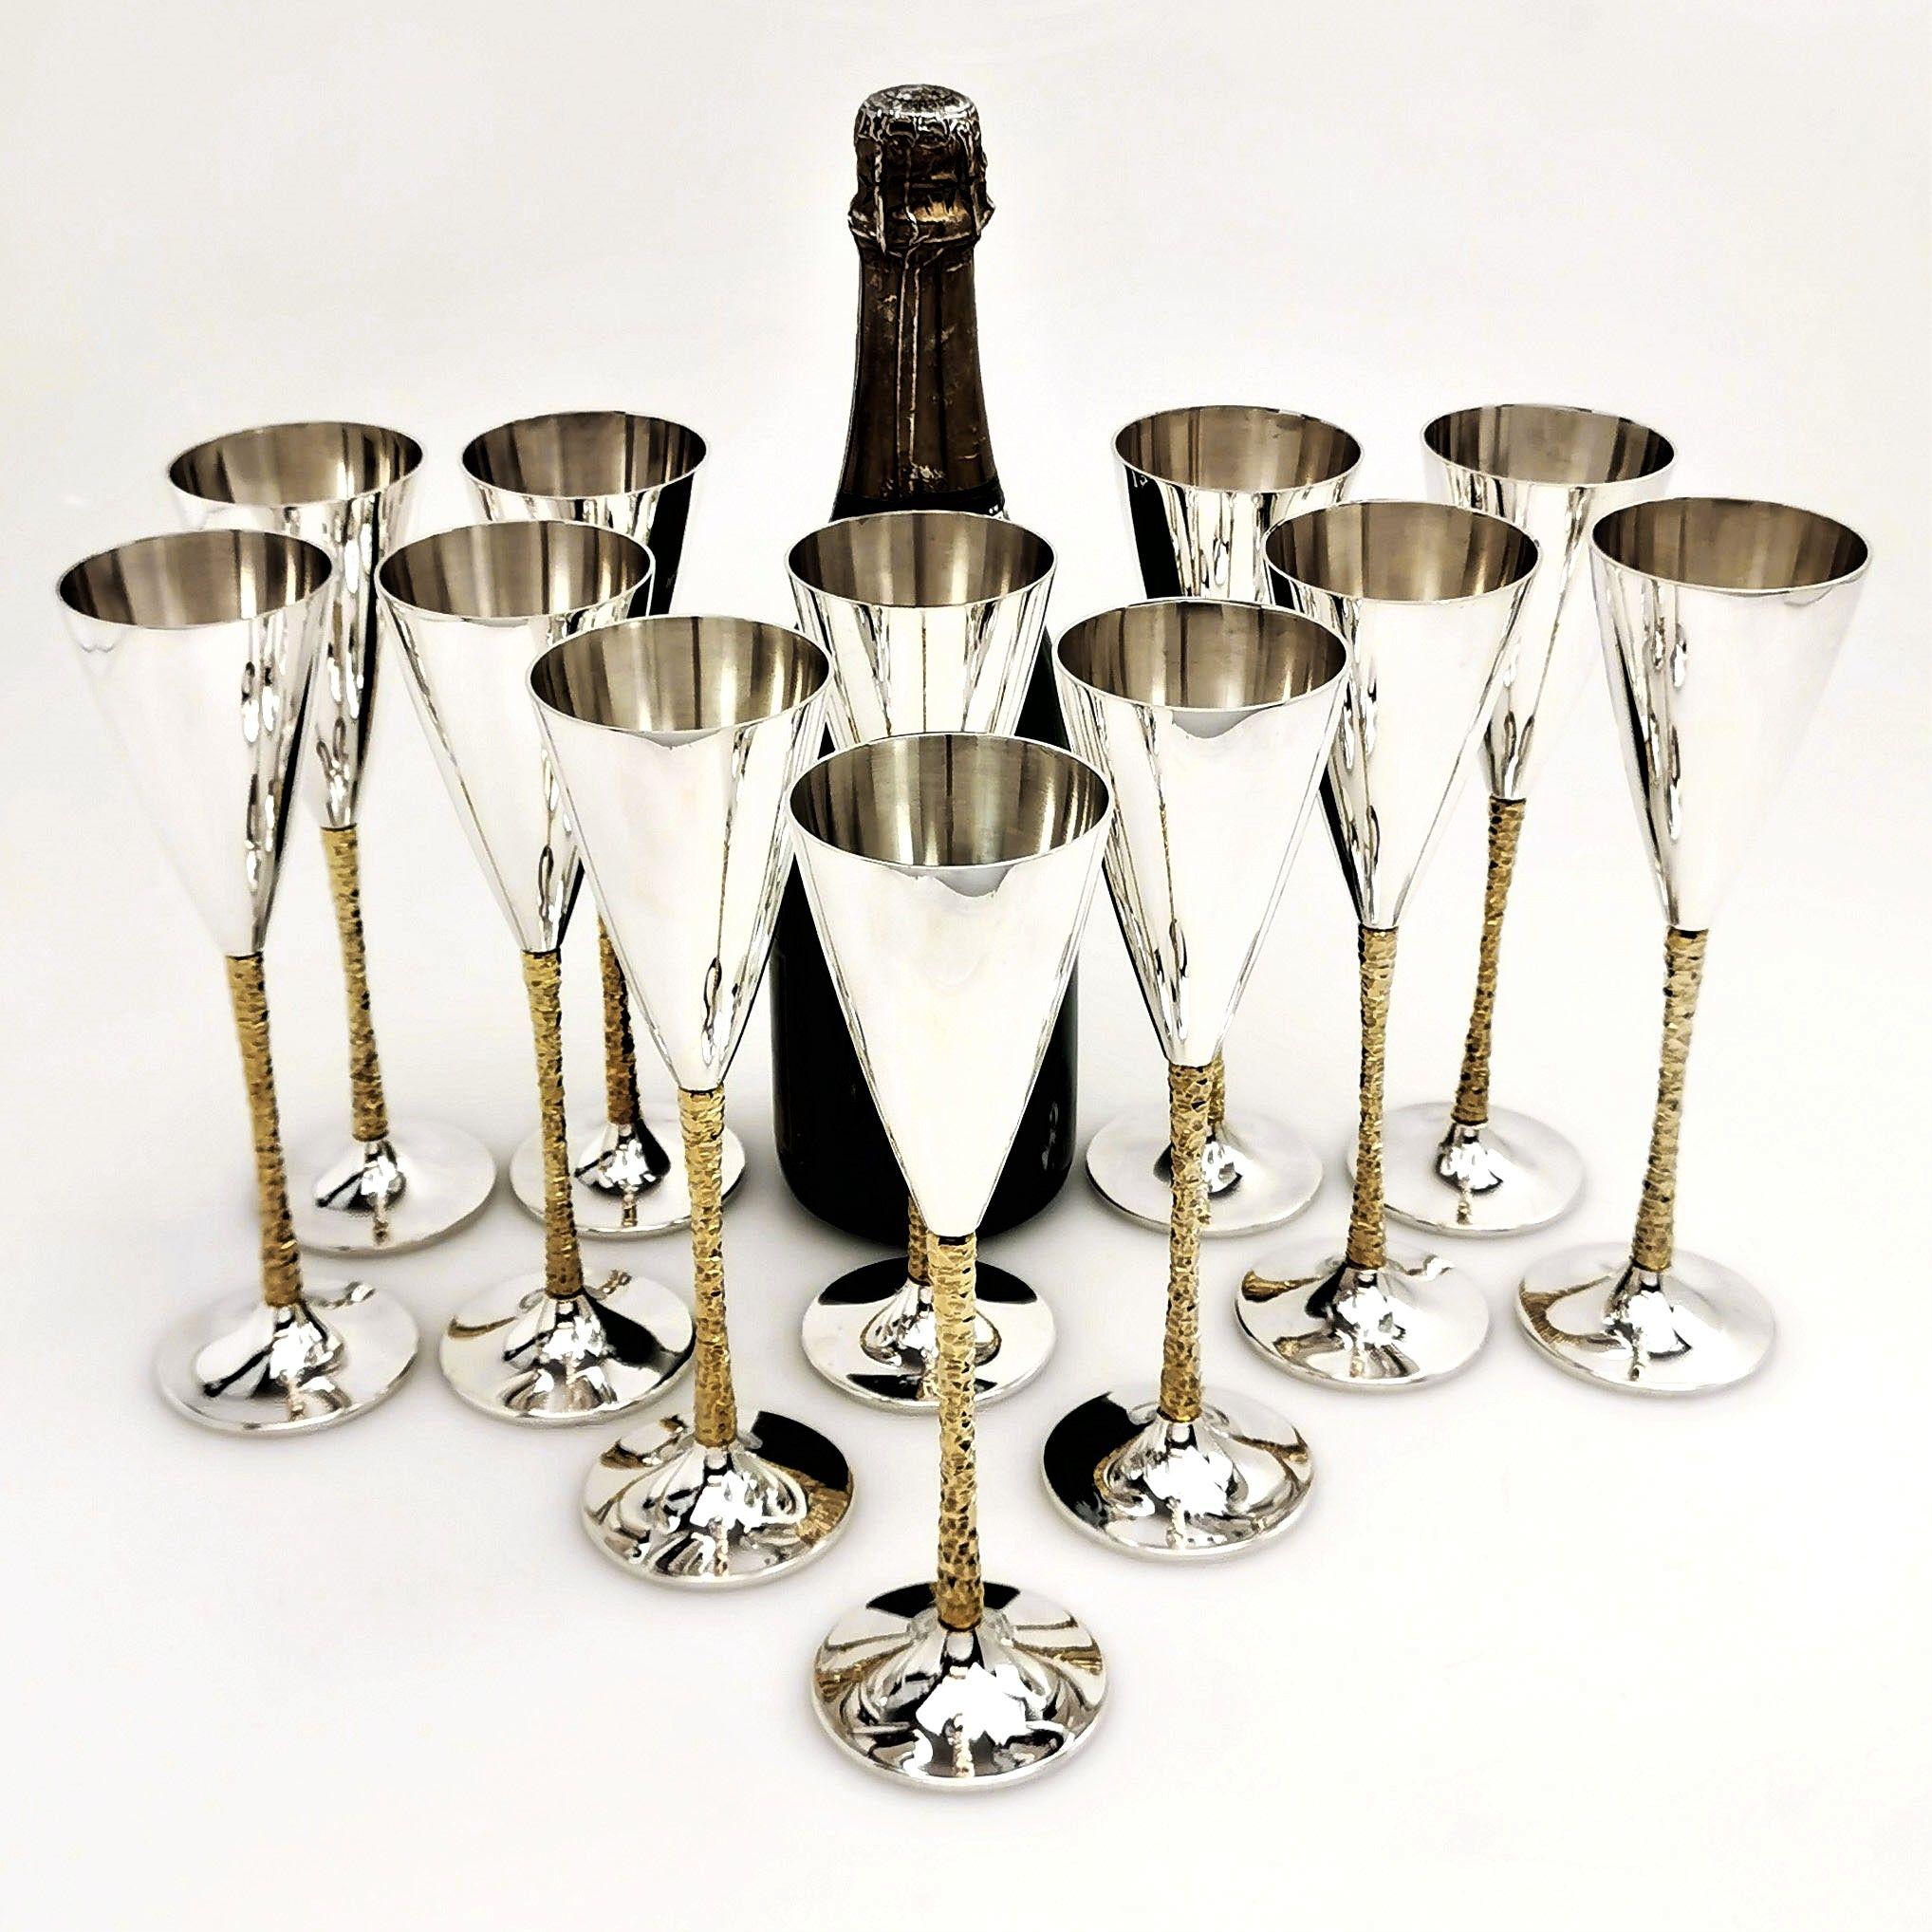 A set of 12 Classic Stuart Devlin Champagne Flutes featuring his Iconic parcel gilt faceted stems and highly polished flutes and bases.
This set of Champagne flutes was made by Stuart Devlin between 1977 and 1980.
 
 Approx. Total Weight of Set -